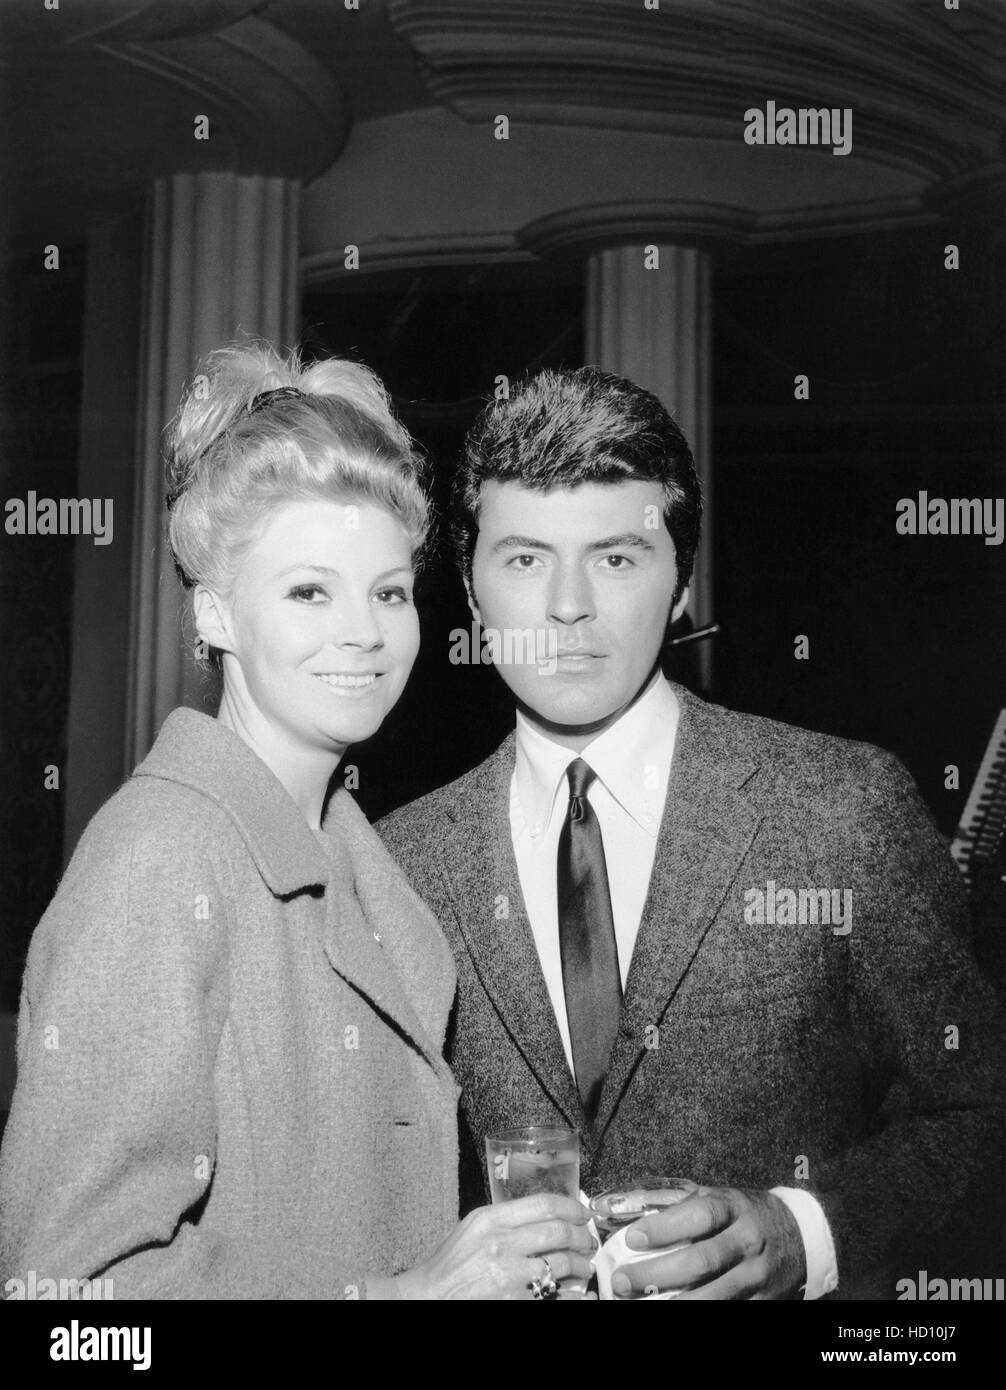 James Darren, right, with his second wife, Evy Norlund, (Miss Denmark ...